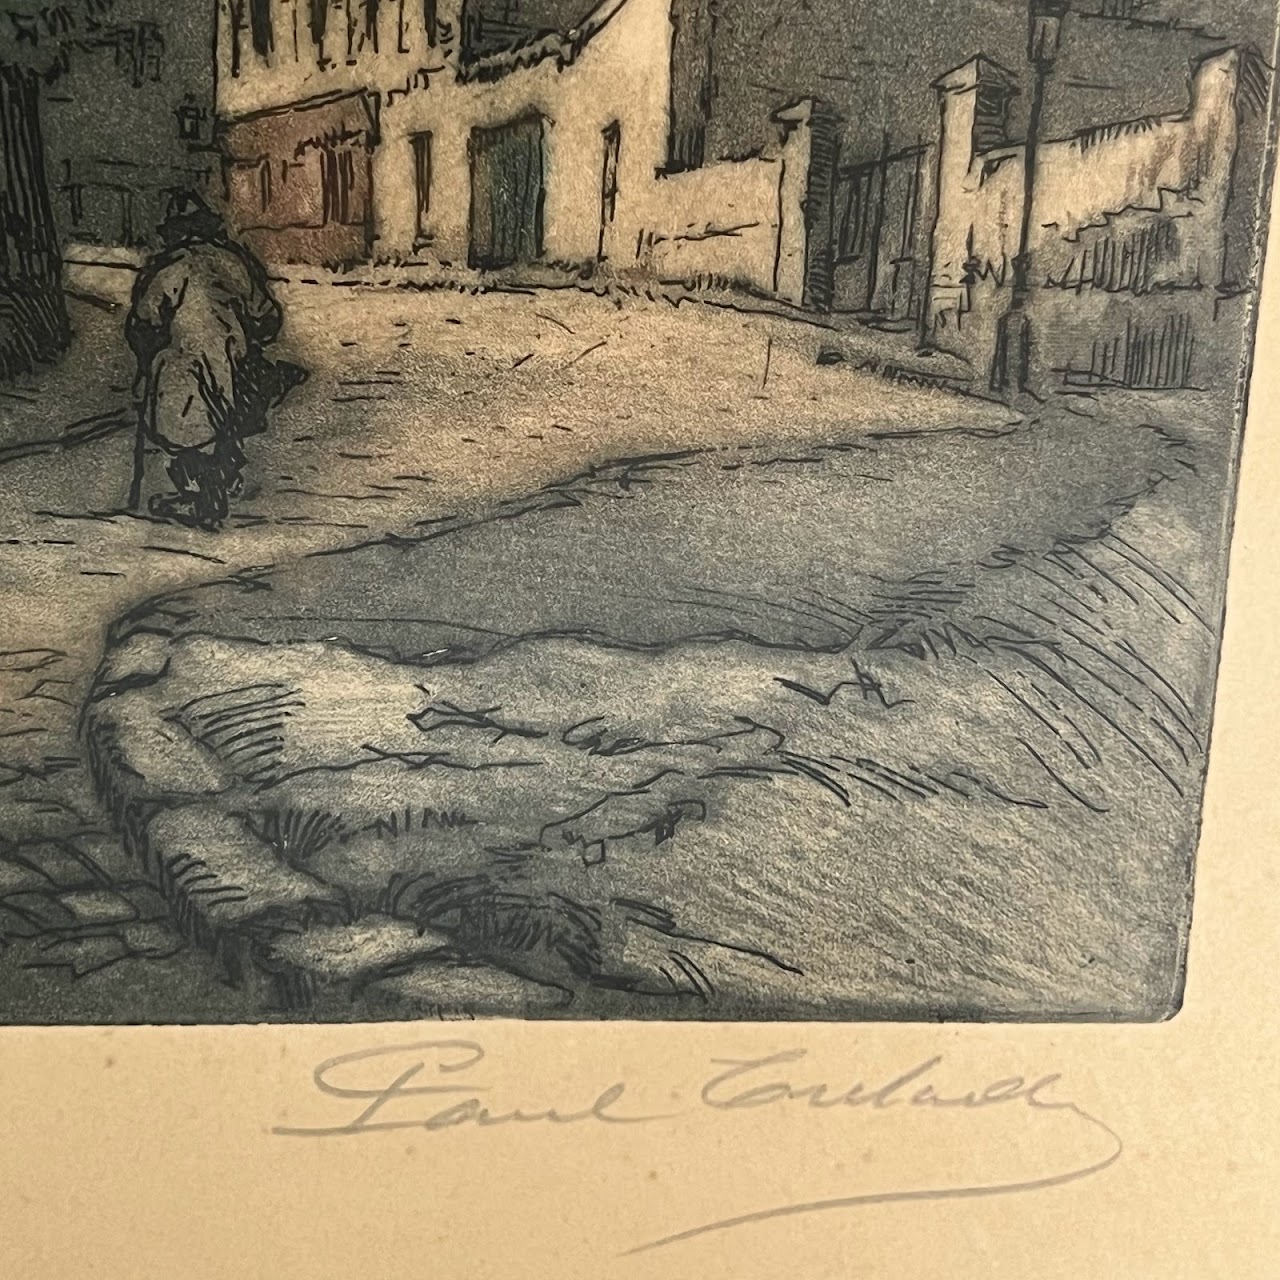 Gen Paul Trelade French Village Scene Drypoint Etching and Aquatint